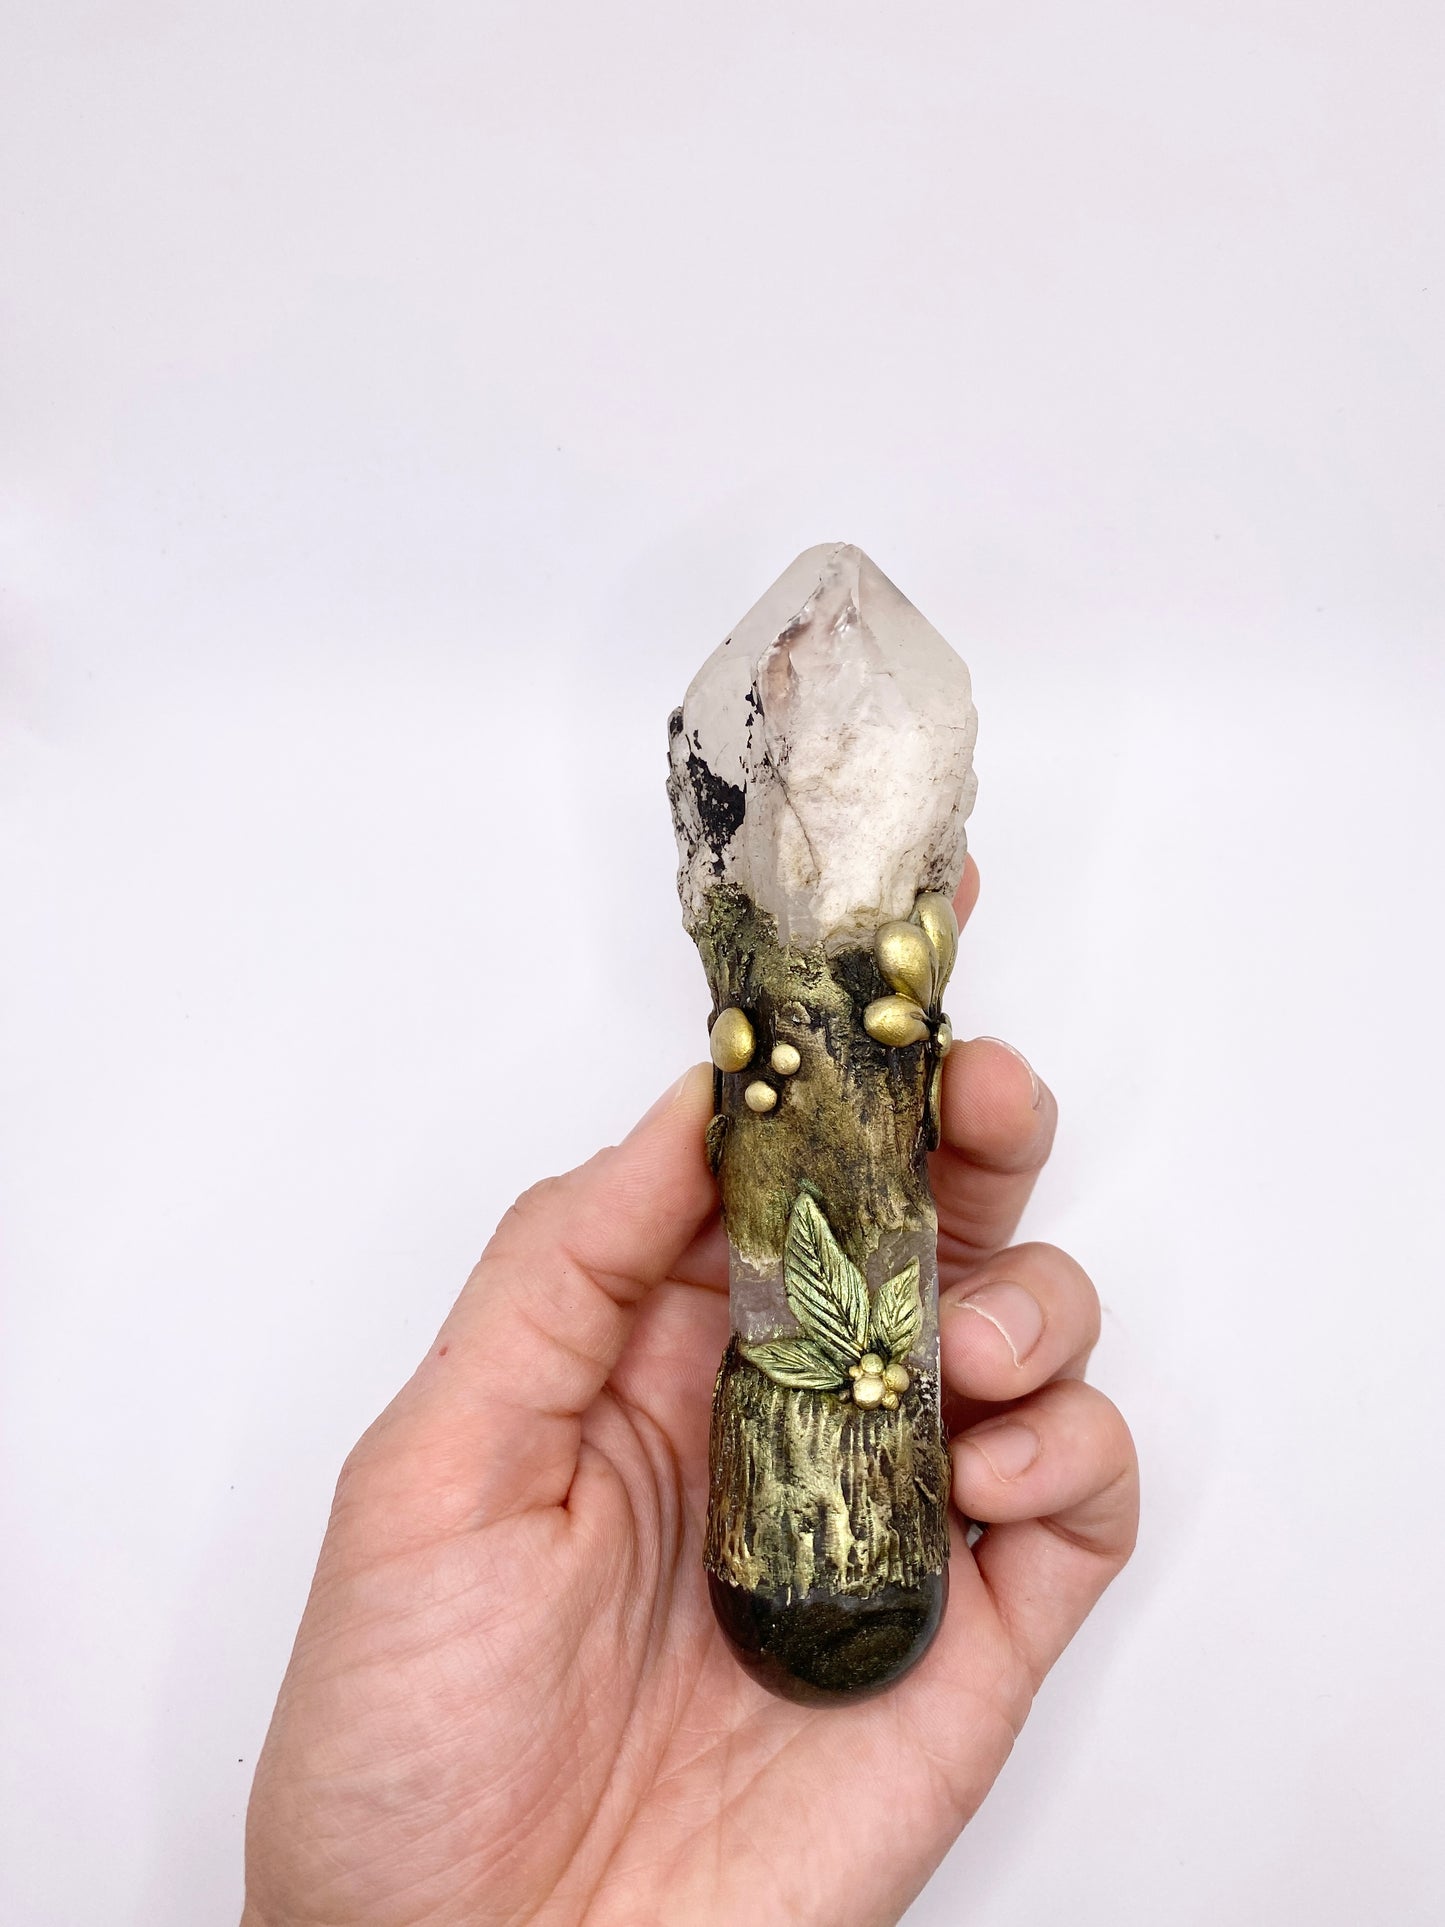 Crystal Energy Wand with Candle Quartz, Angel Aura Quartz, Gold Sheen Obsidian and Moonstone Crescent - Reversible Metaphysical Wand